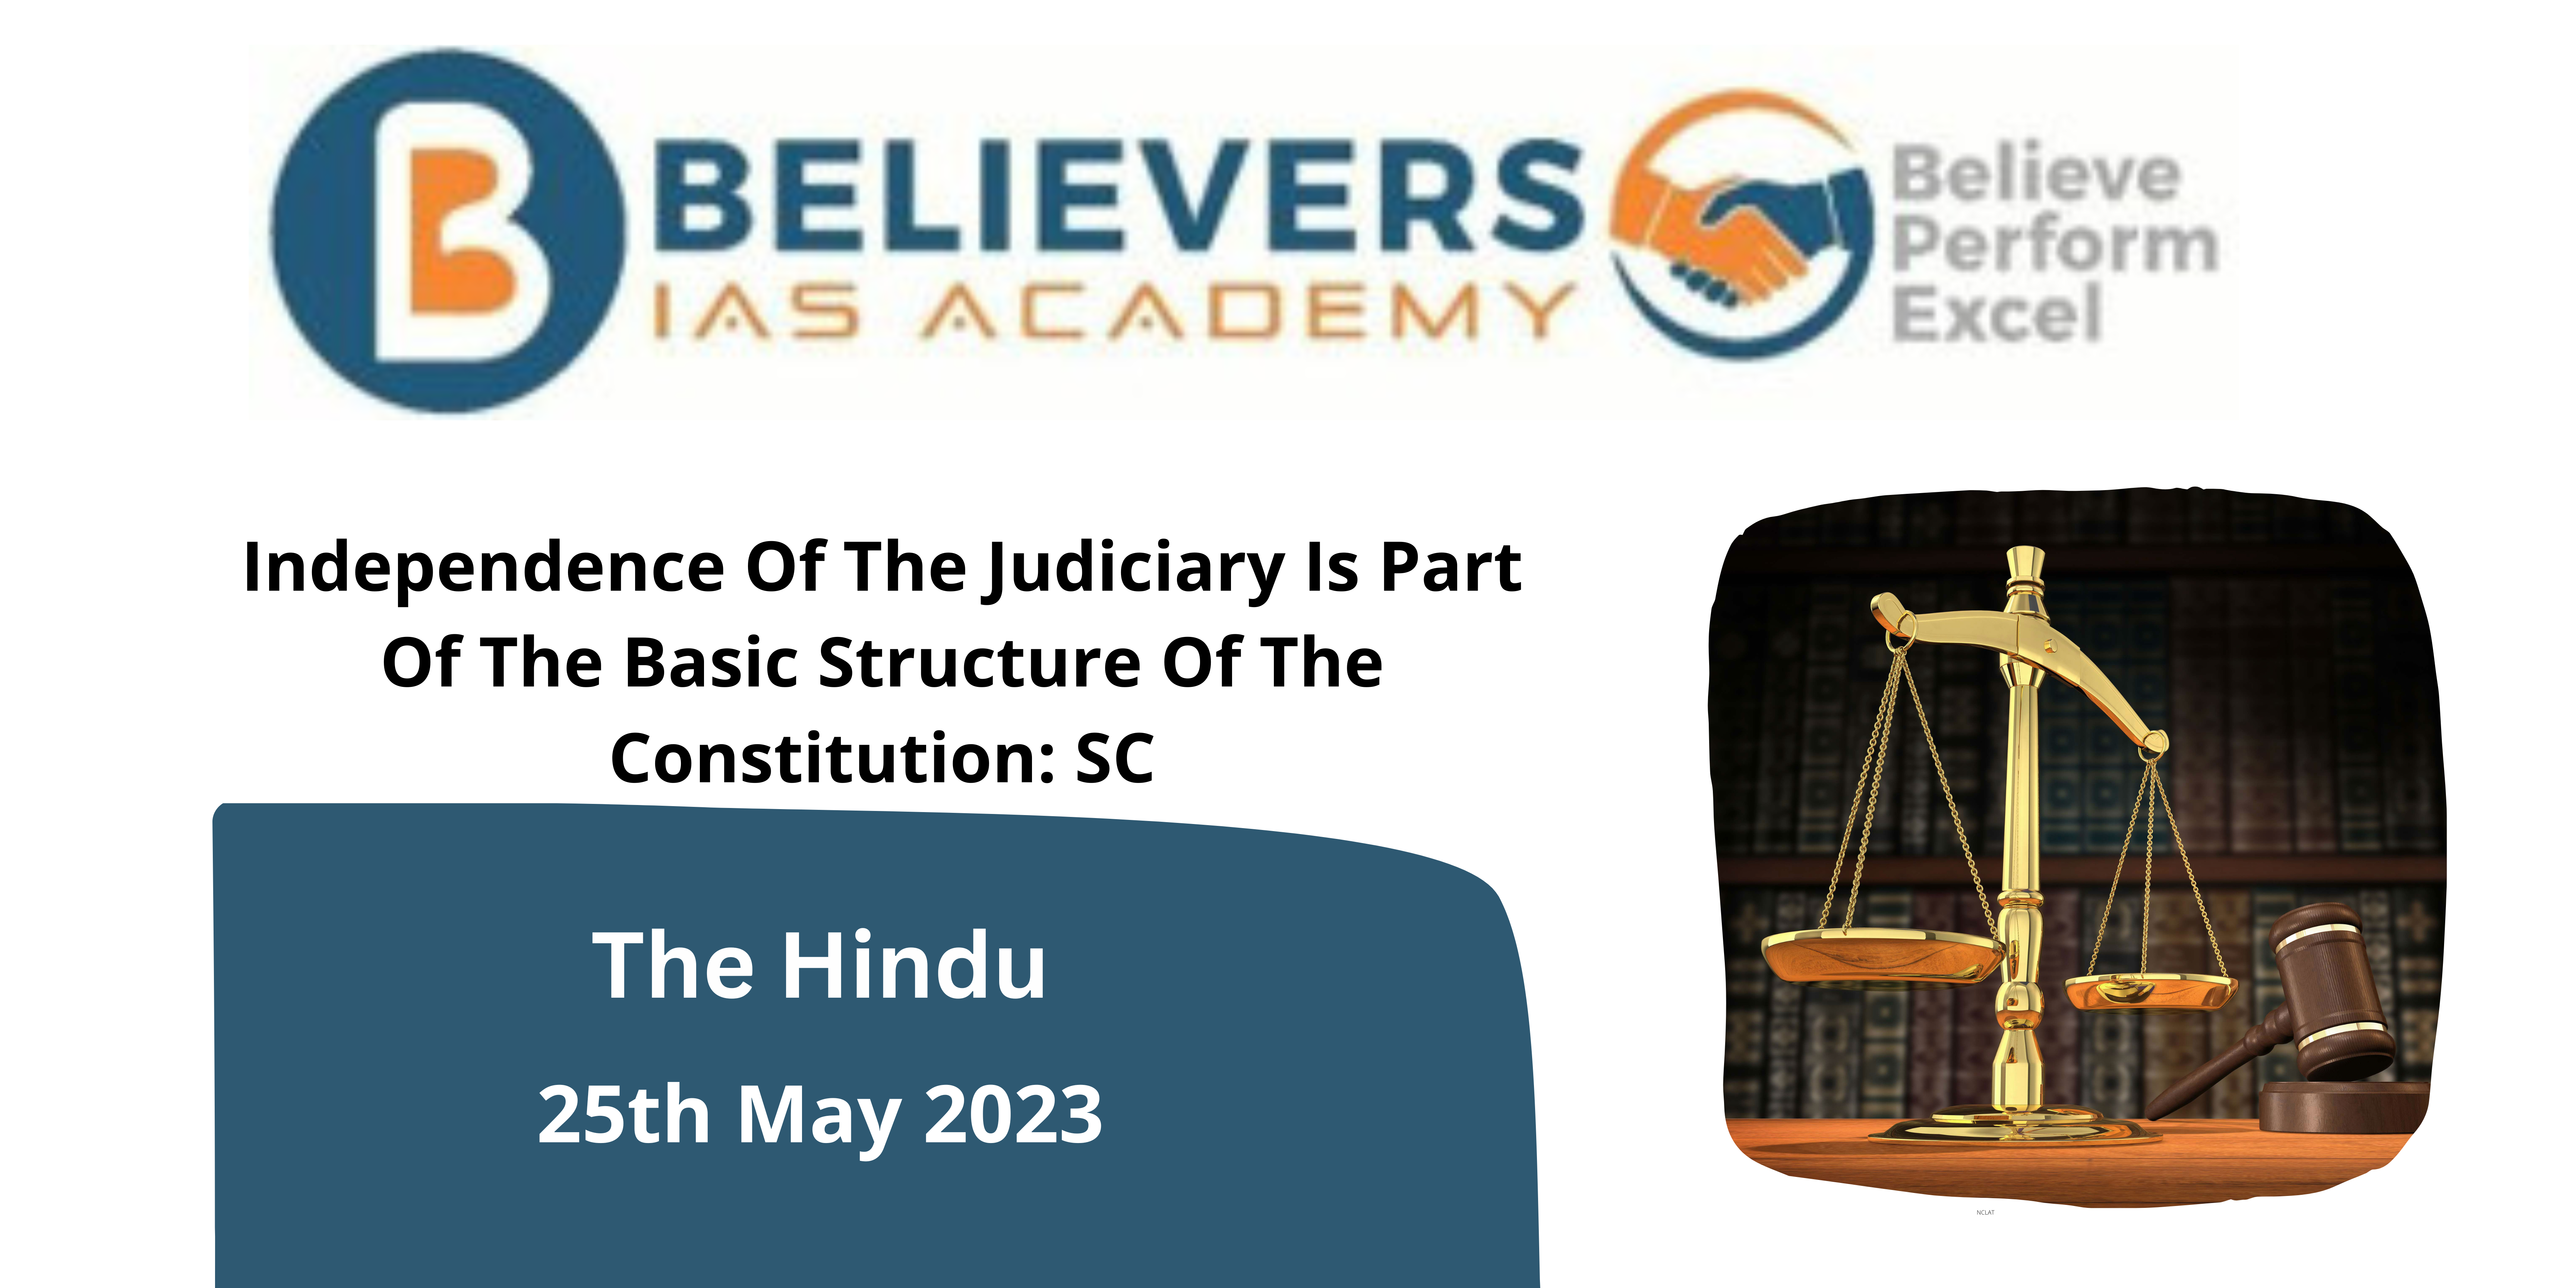 Independence Of The Judiciary Is Part Of The Basic Structure Of The Constitution: SC